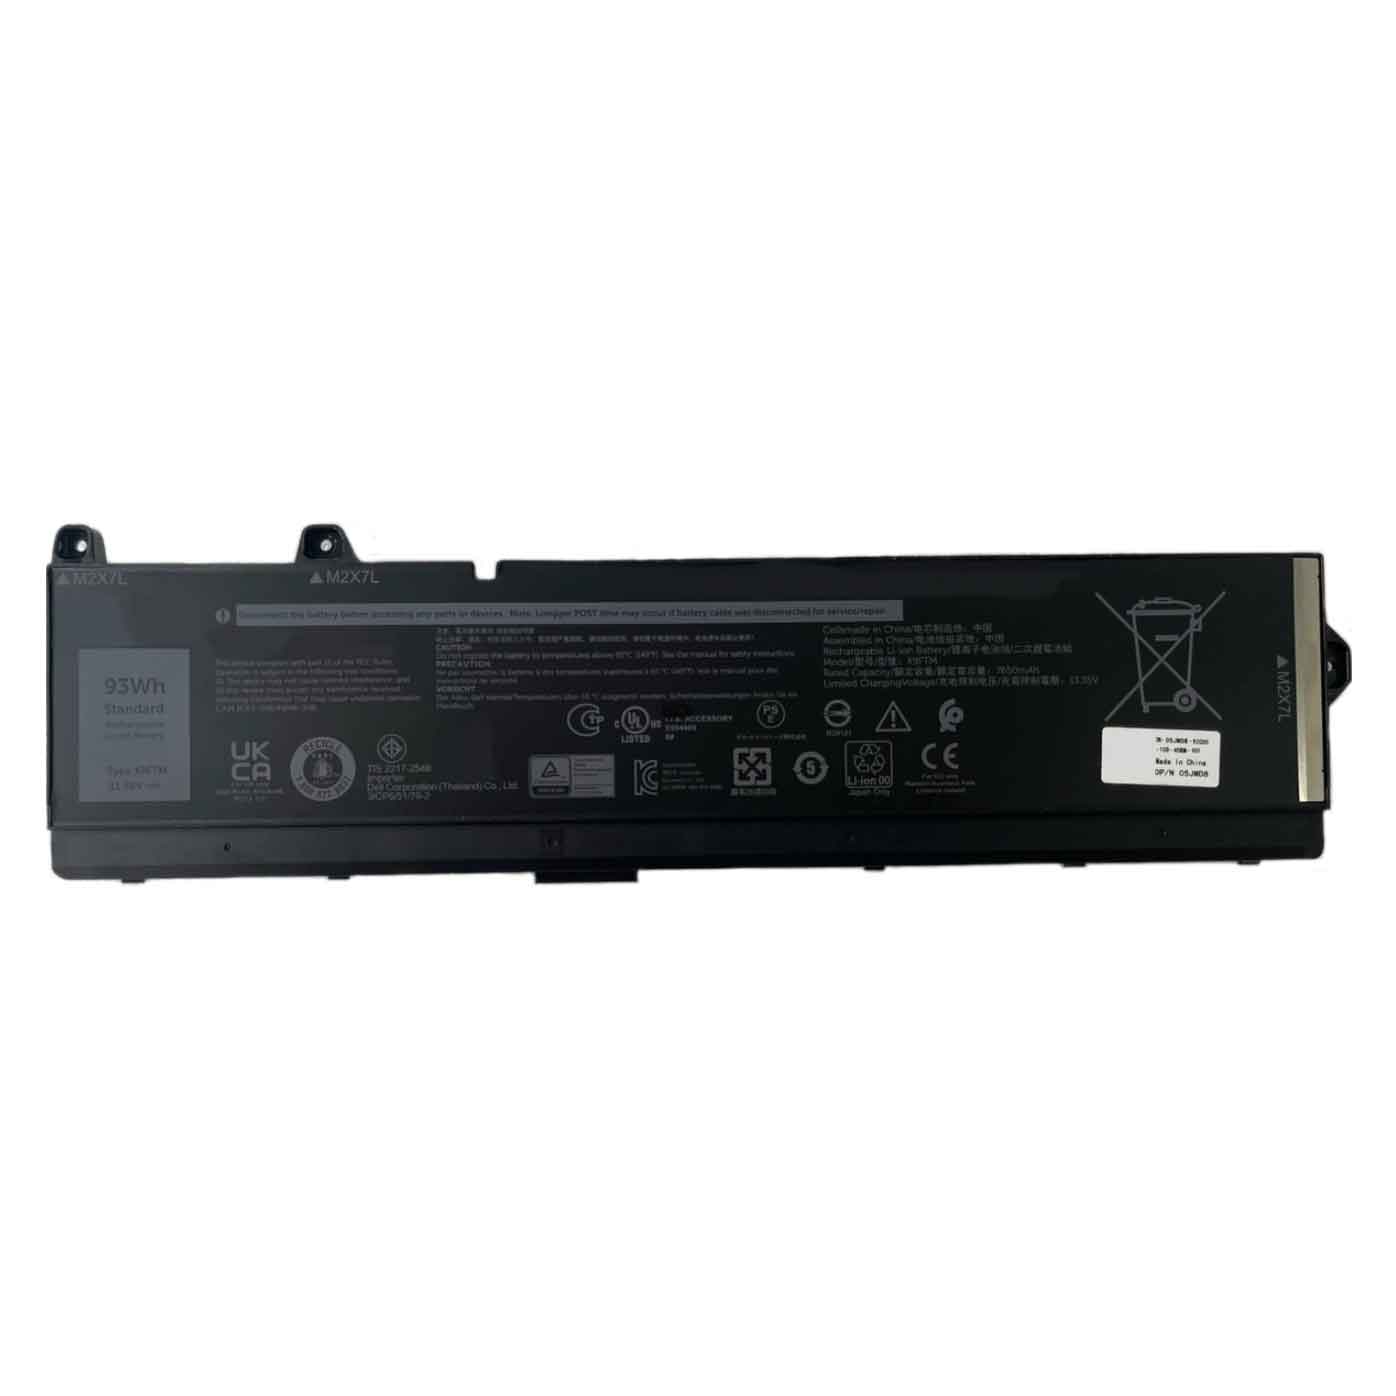 Replacement for Dell X9FTM